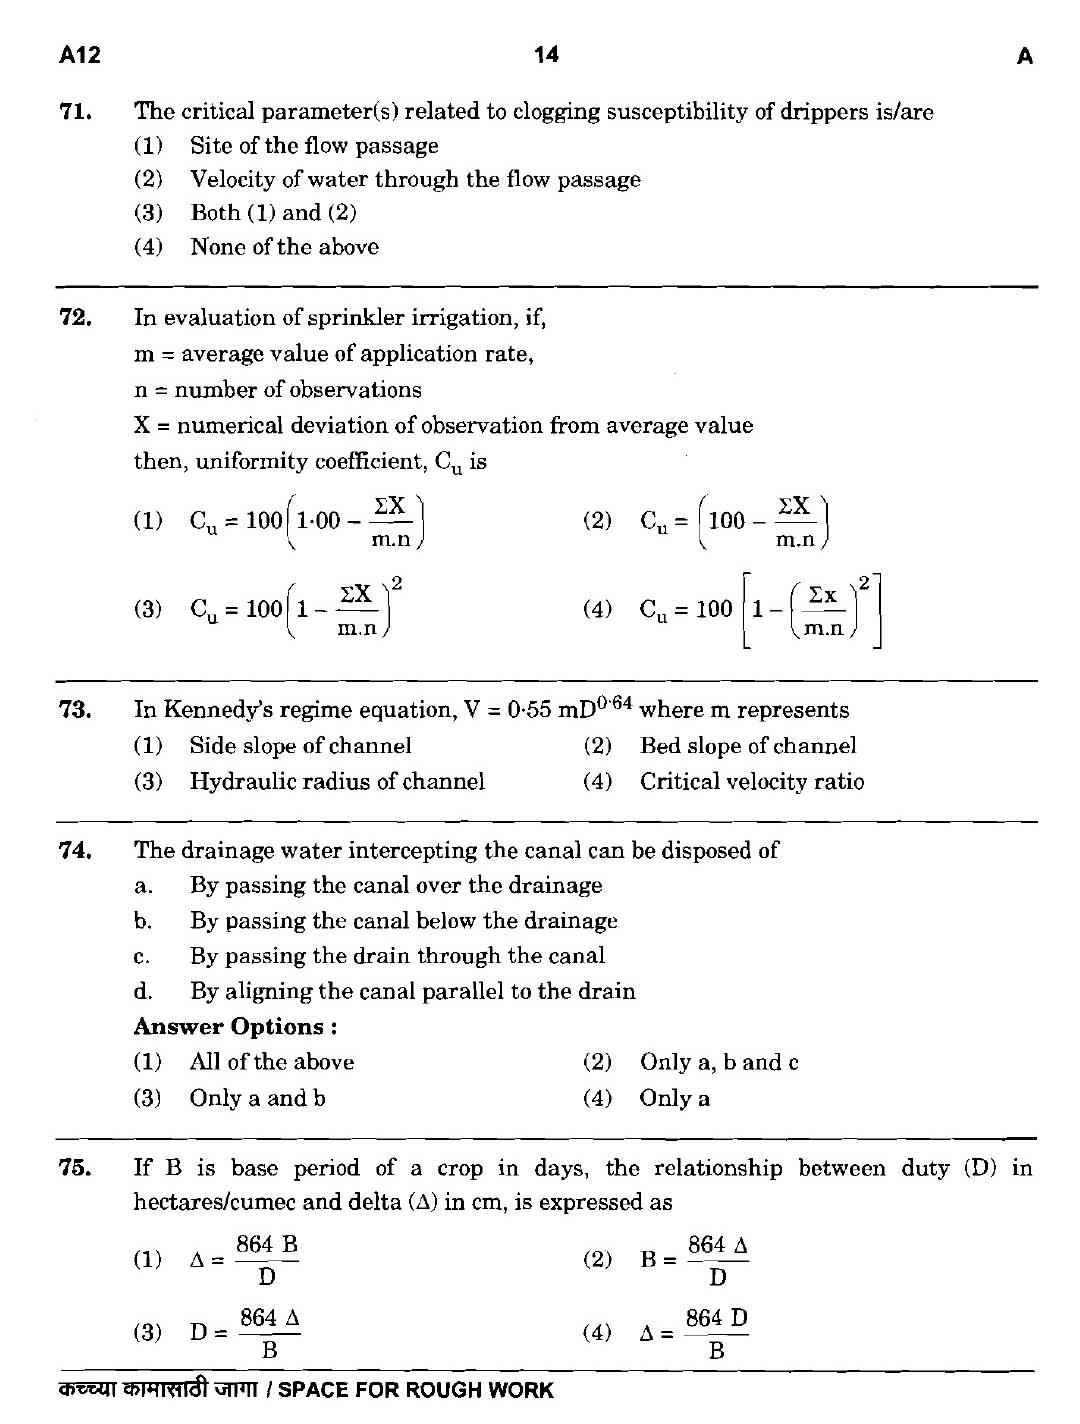 MPSC Agricultural Services Main Exam 2018 Question Paper 2 Agricultural Engineering 13